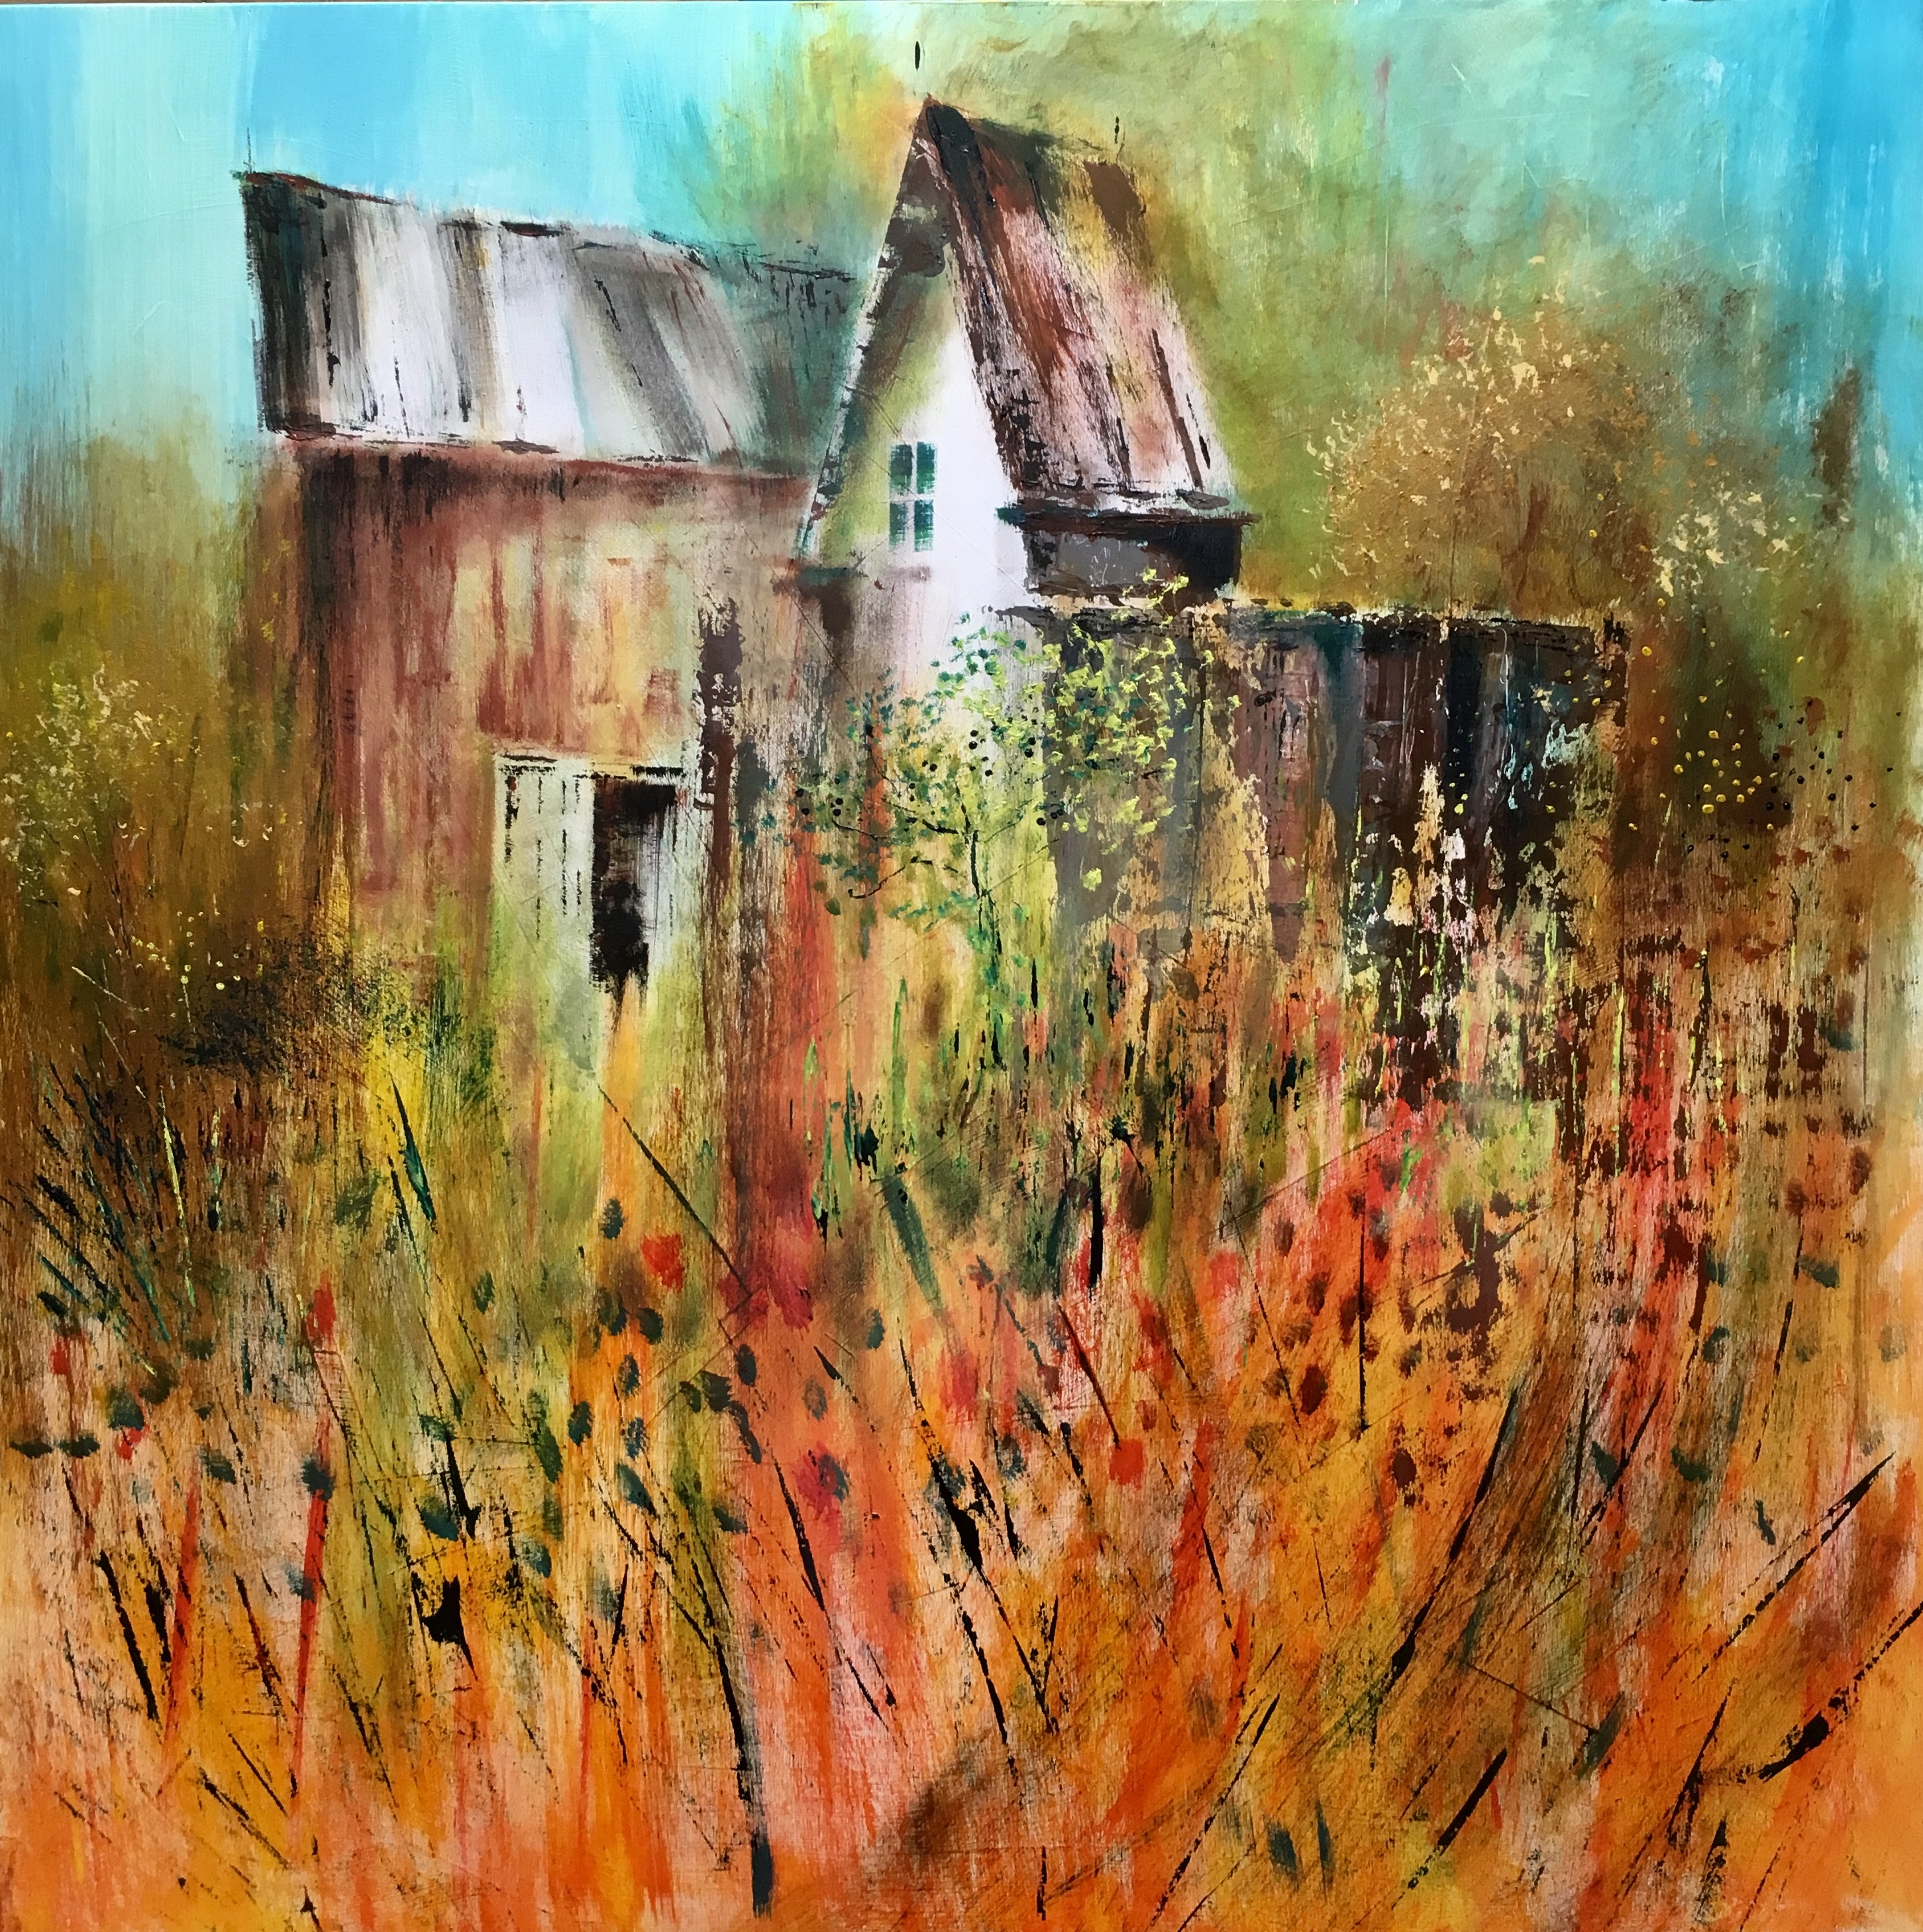 Rust and Reds
Acrylic